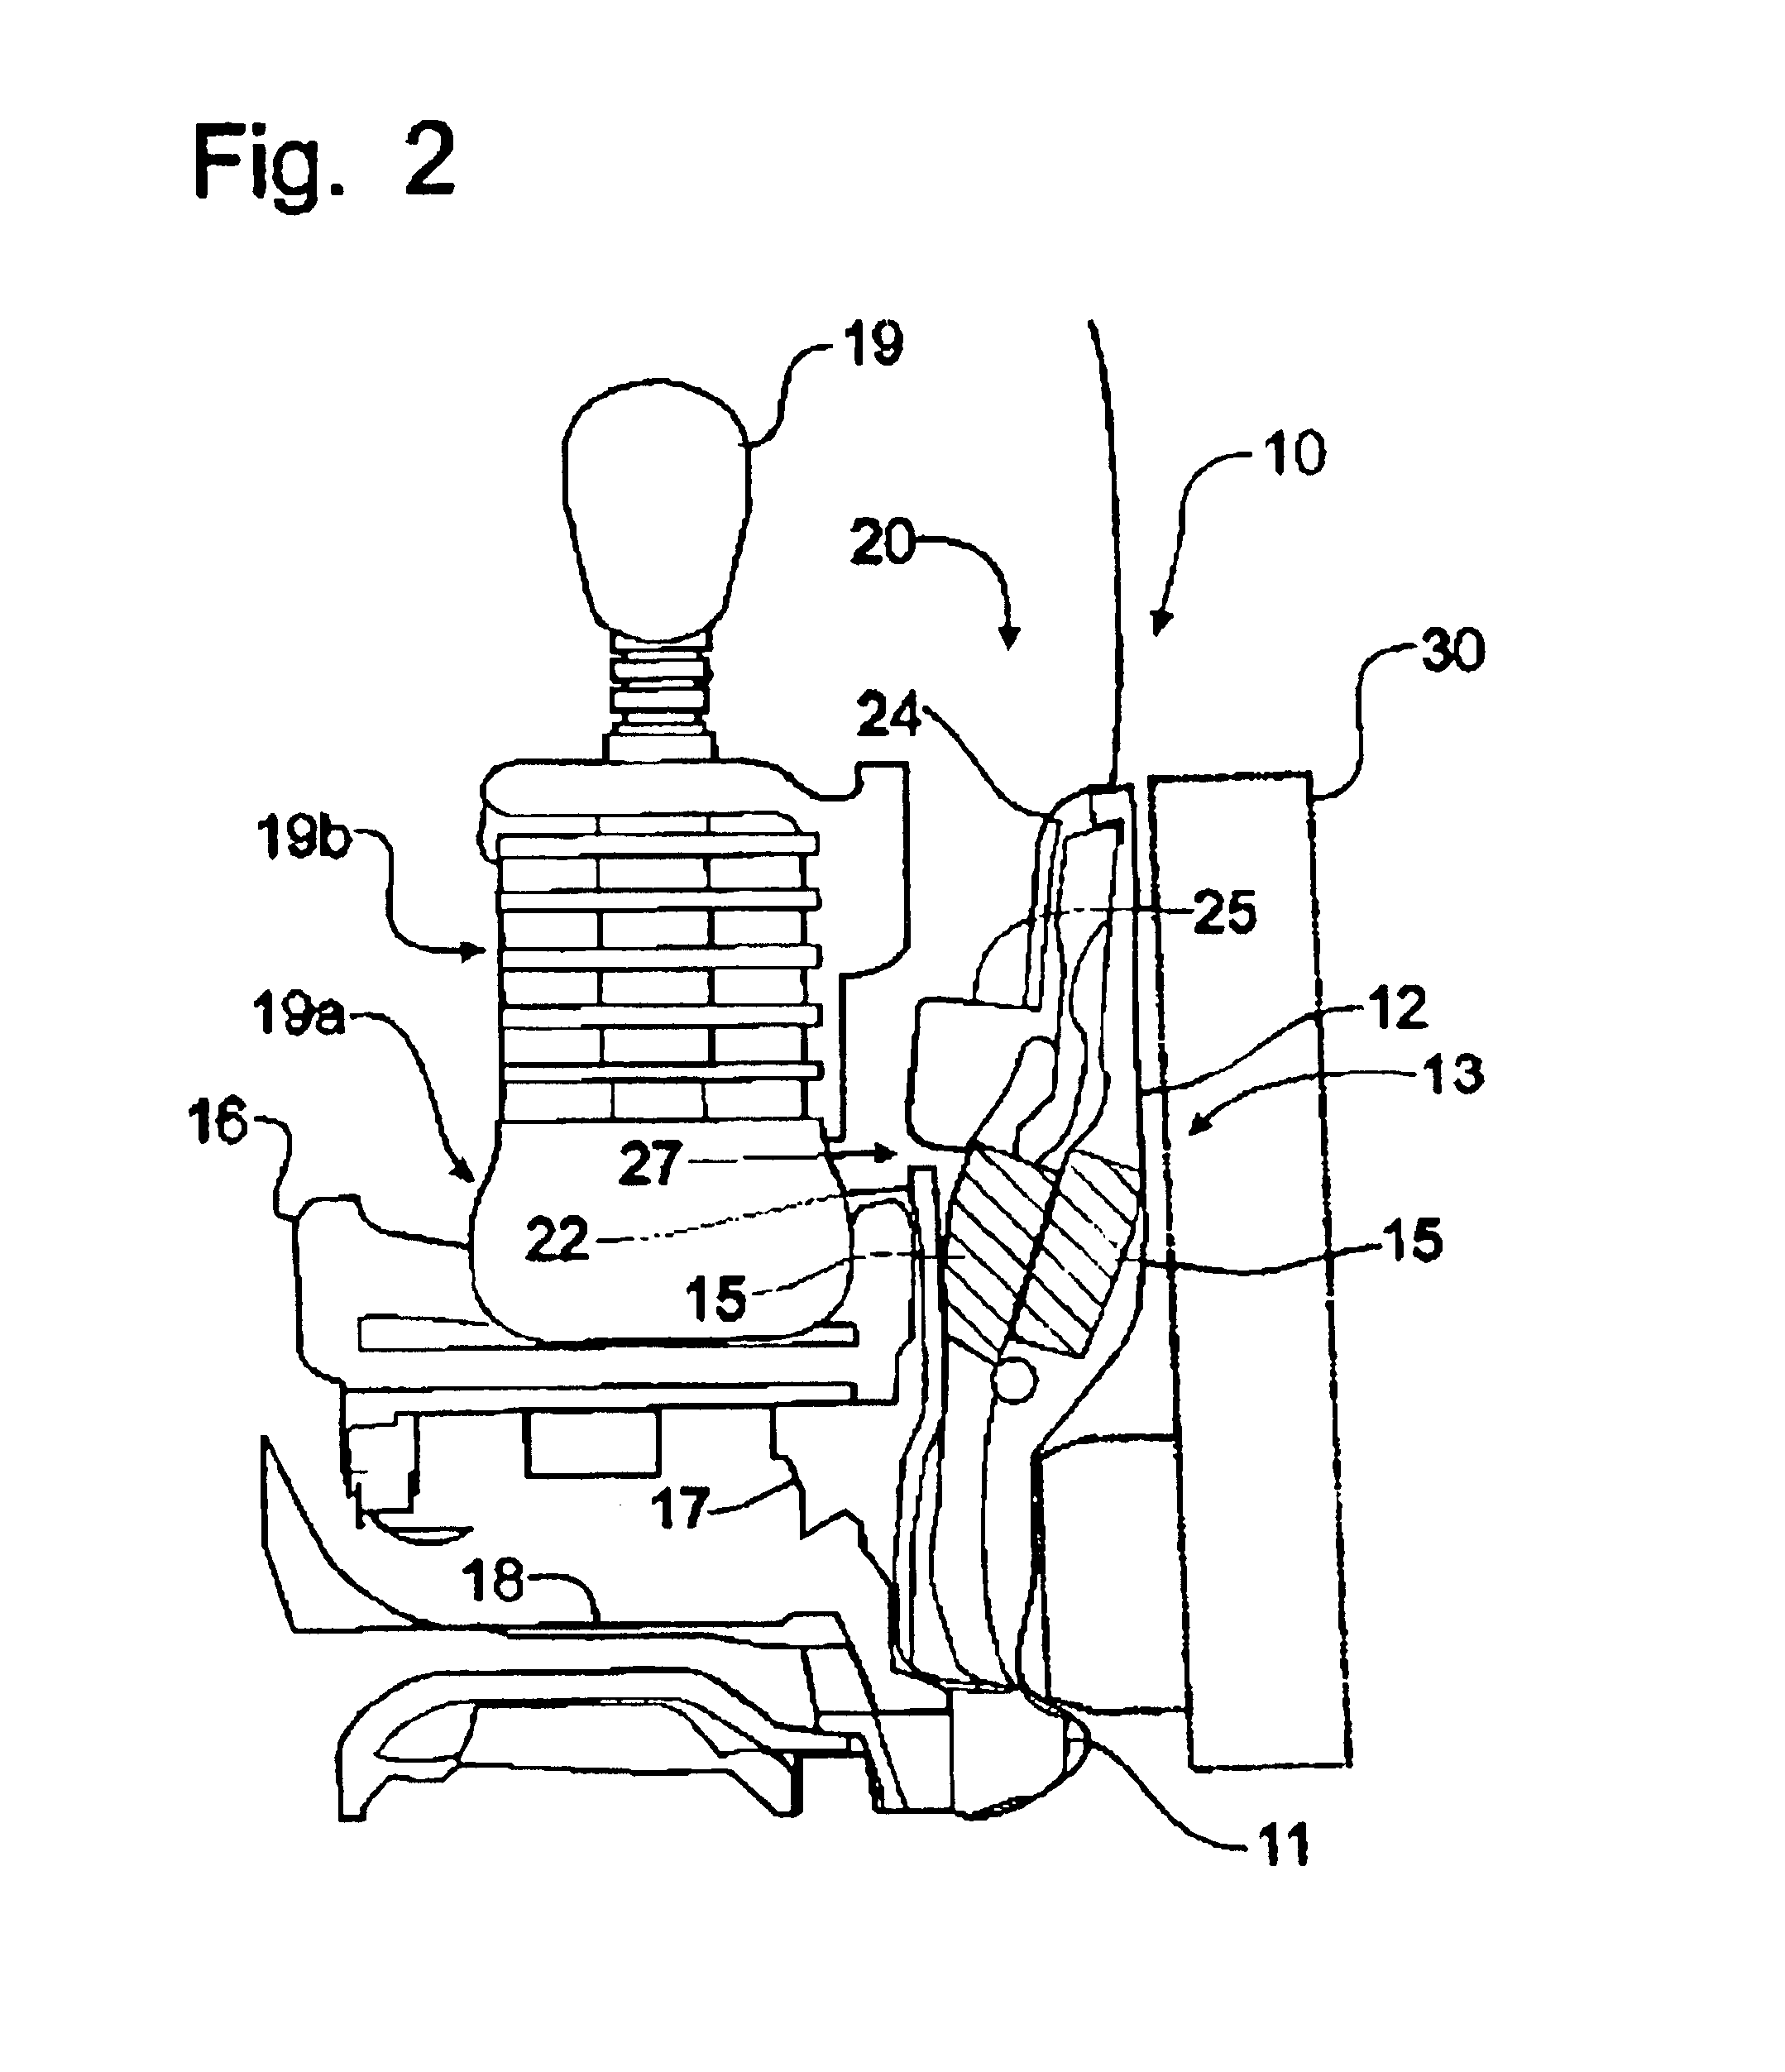 Deployable trim for side impact system in automobiles